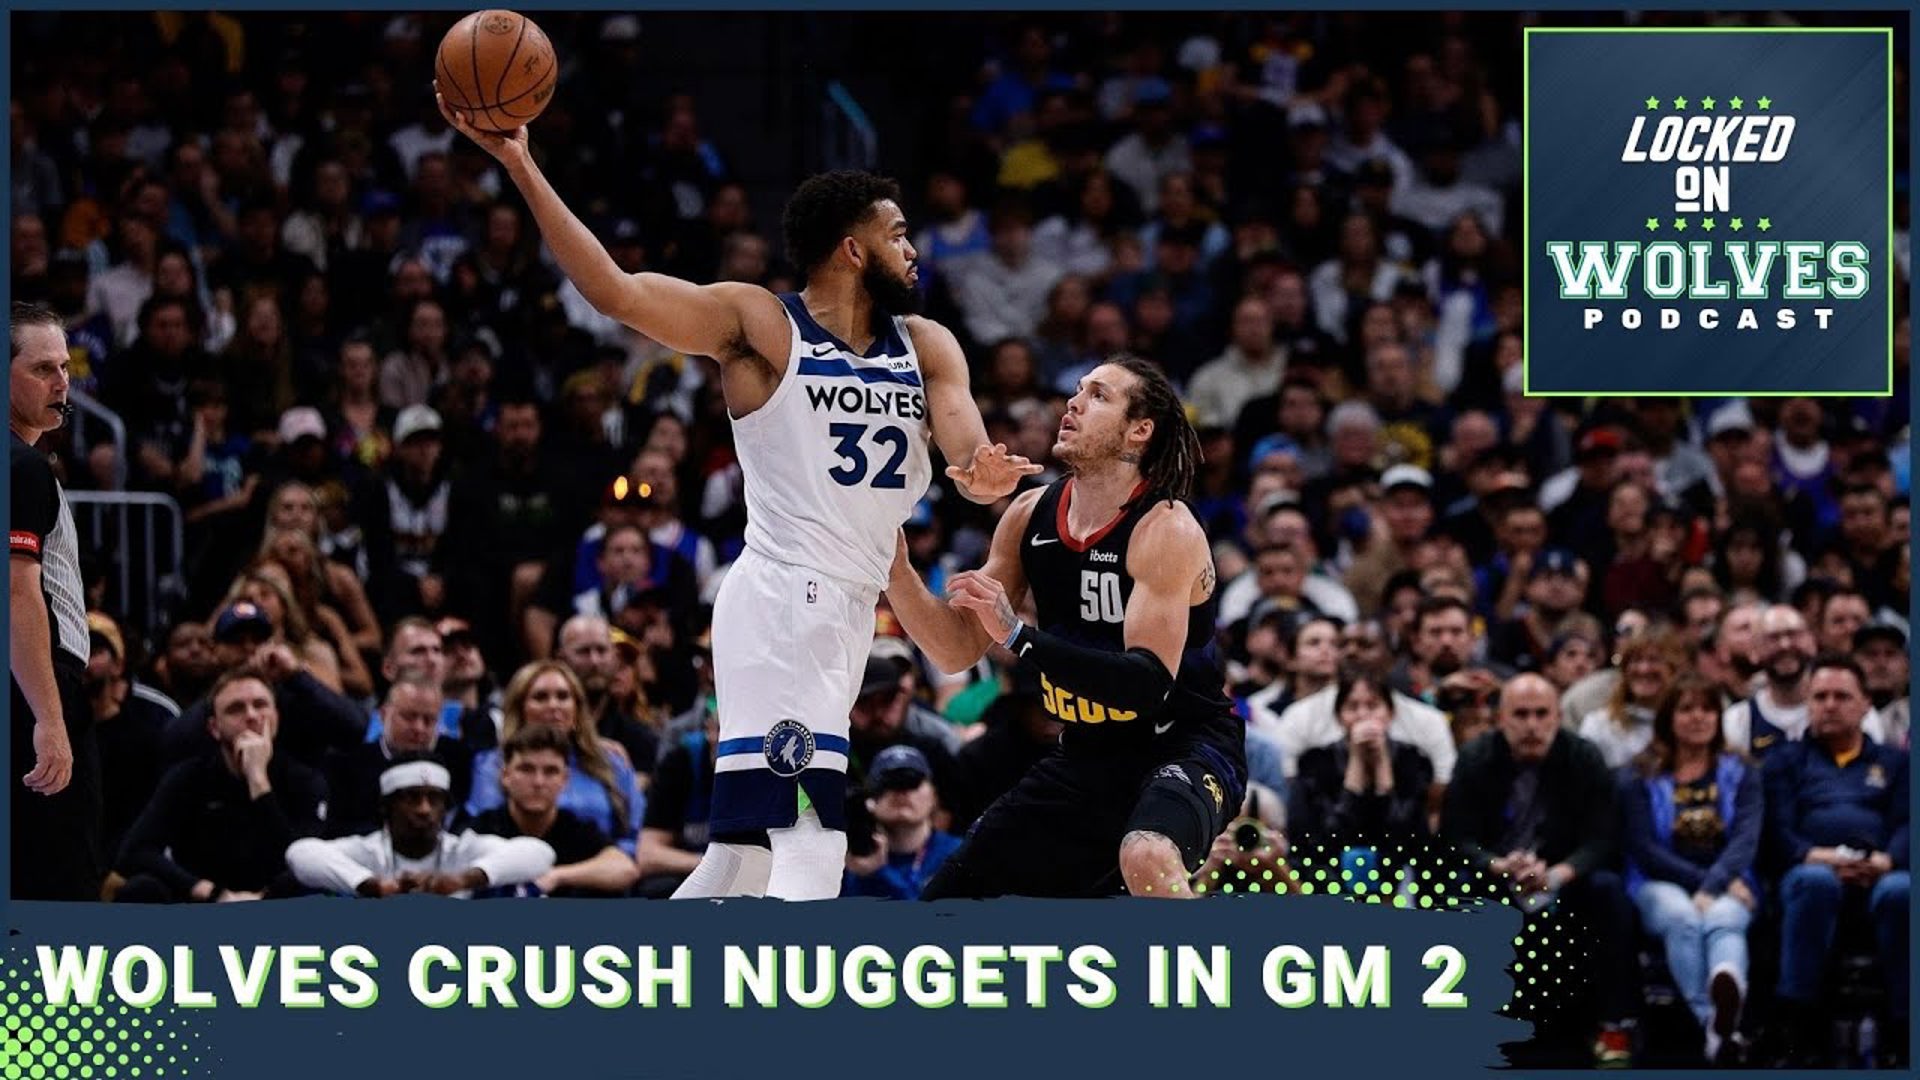 Minnesota Timberwolves defense stifles the Denver Nuggets as the Wolves take a 2-0 series lead